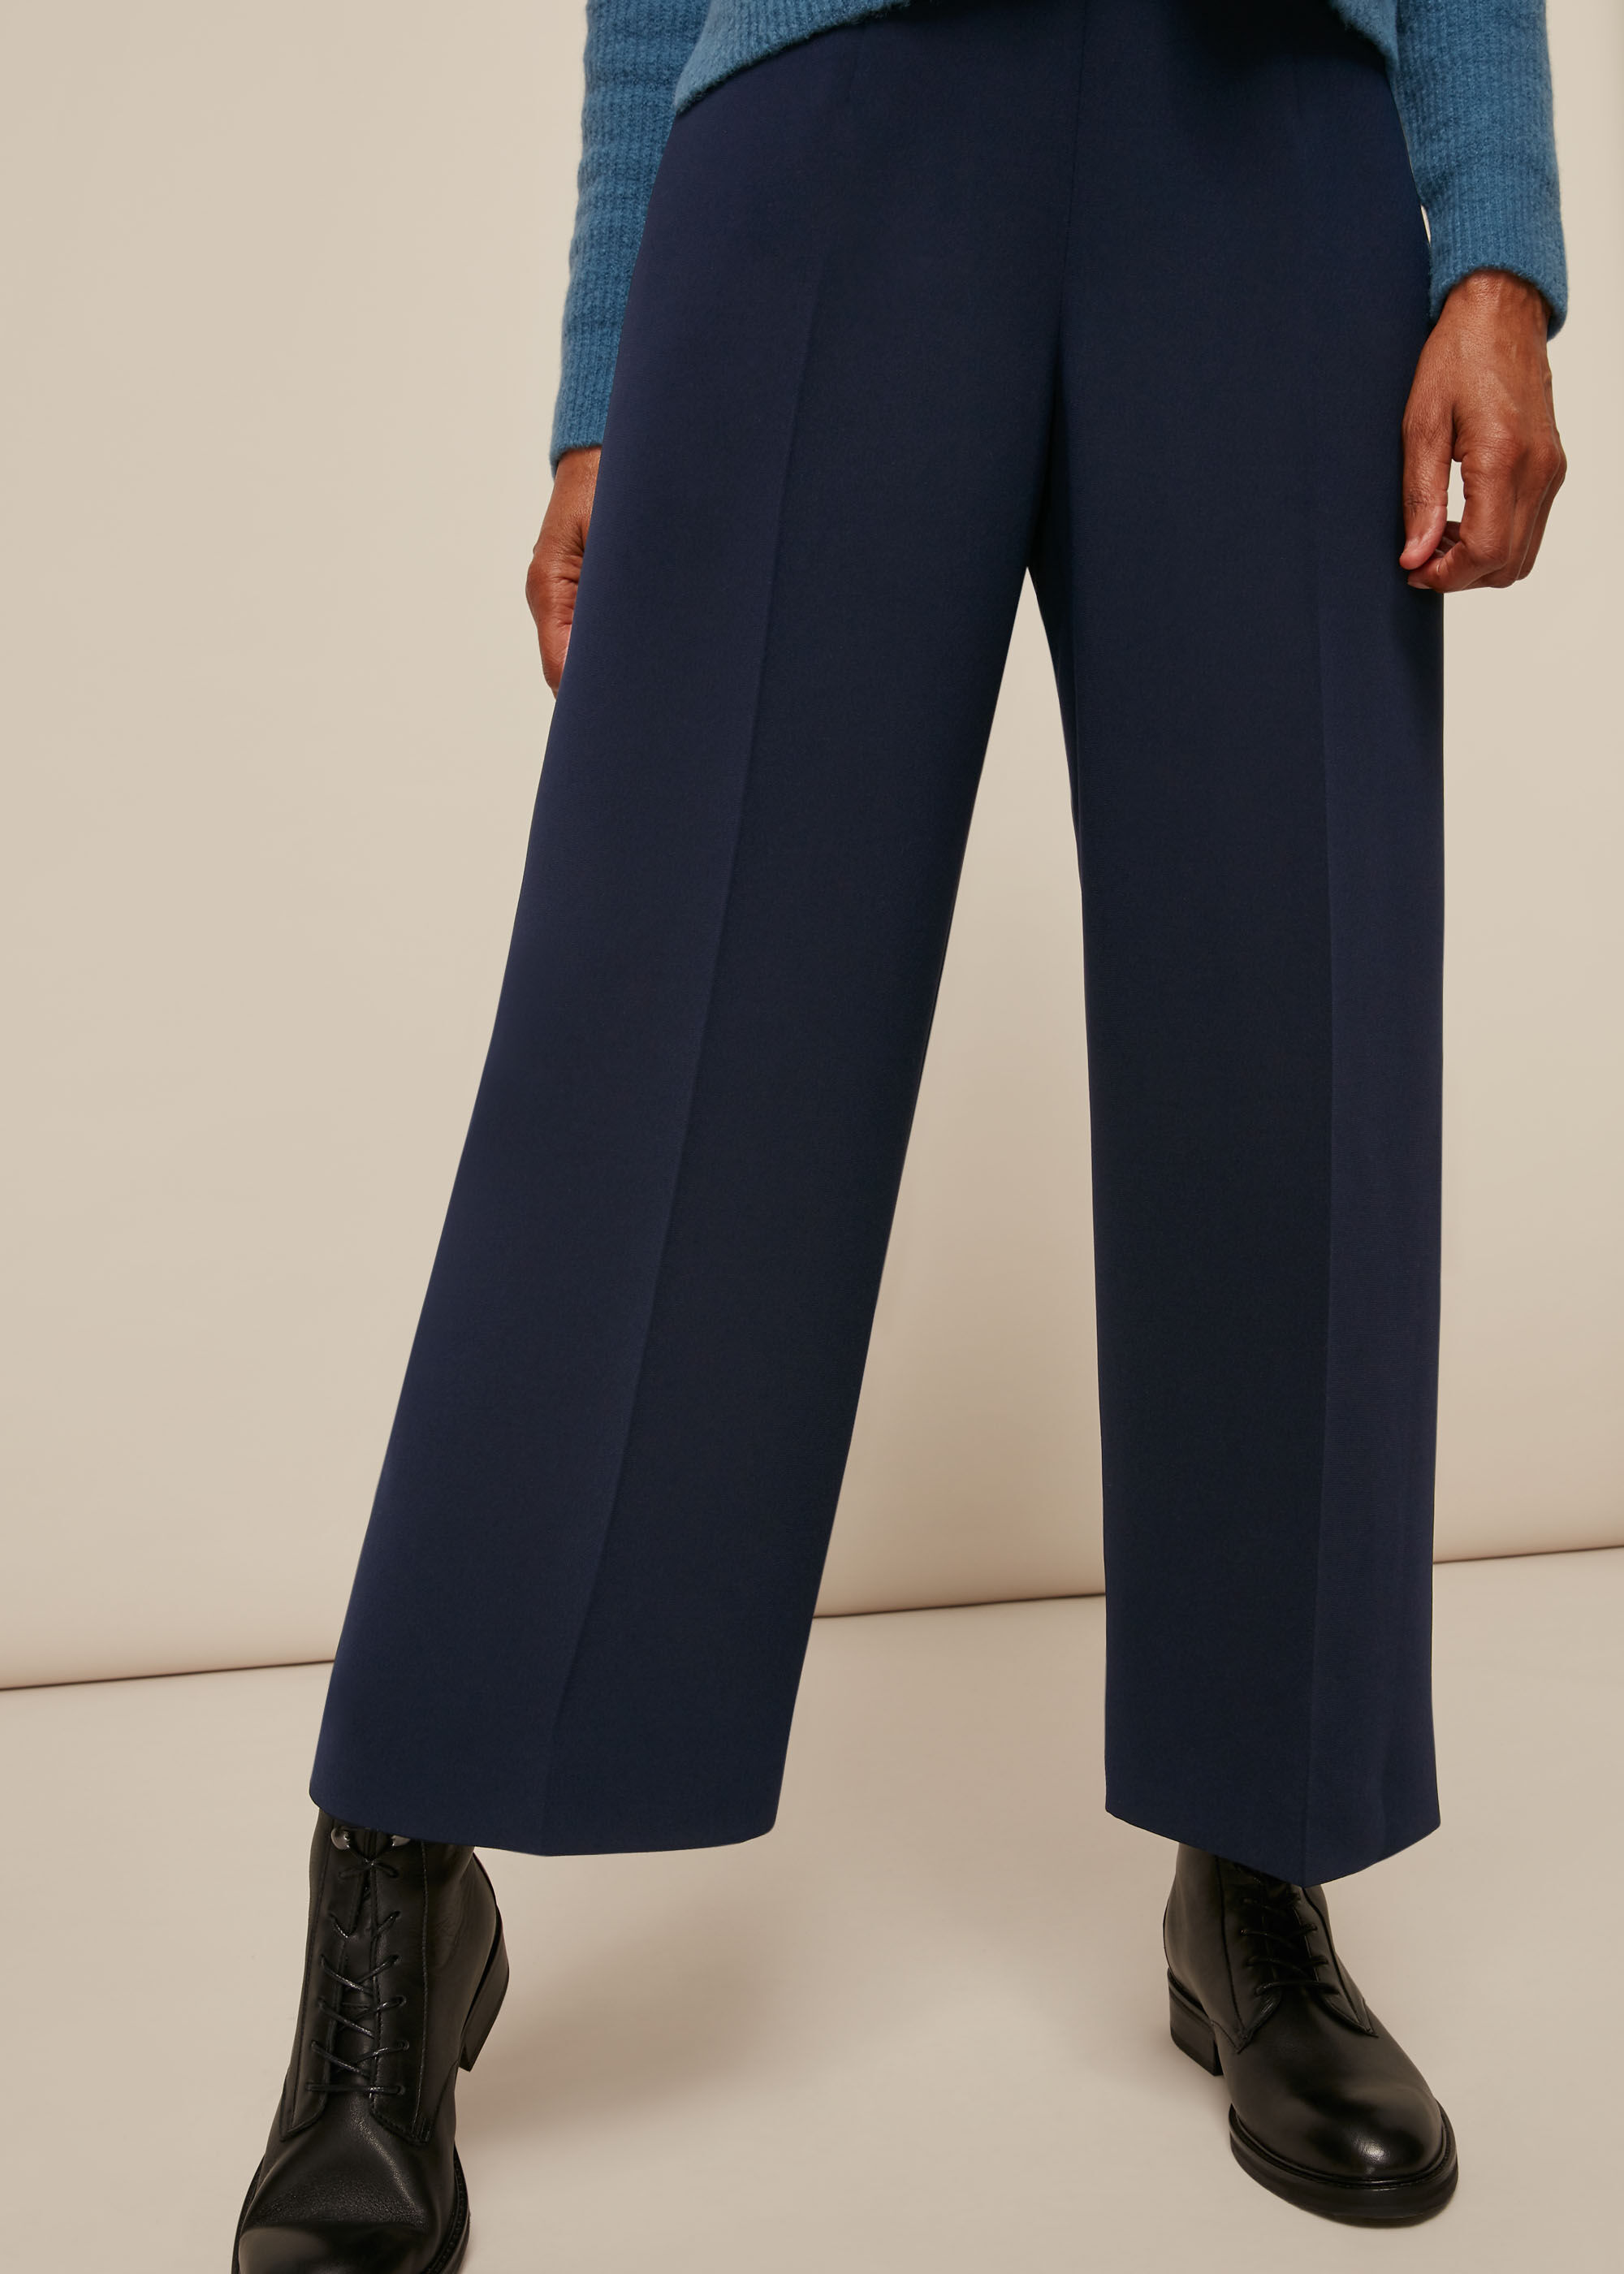 Buy Women Navy Cropped Trousers  Trends Online India  FabAlley